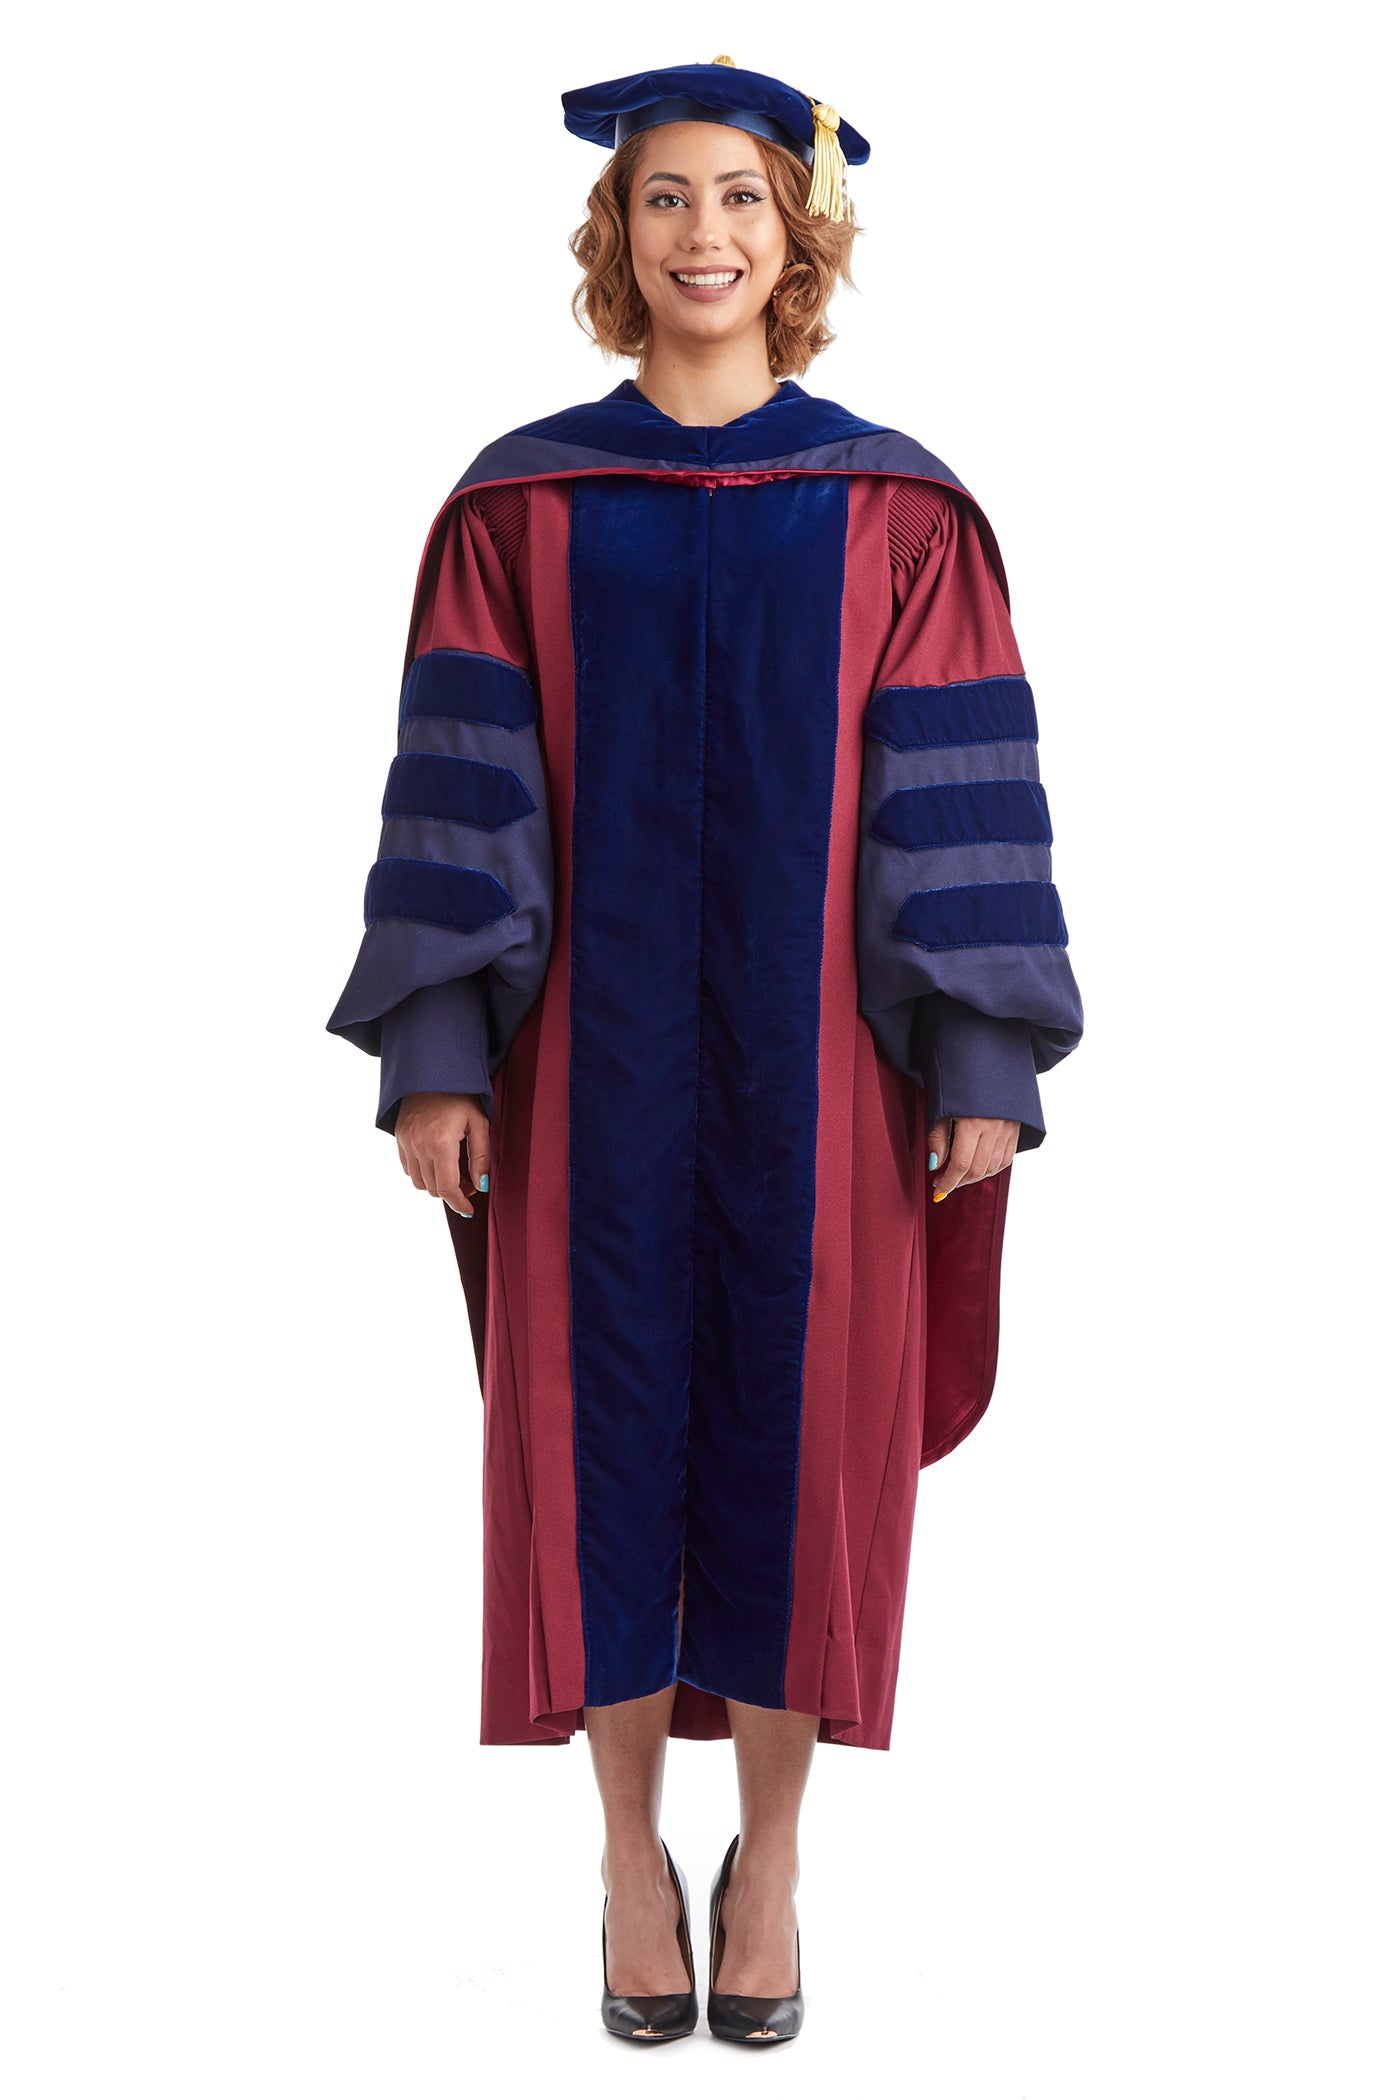 Buy Nic Graduation Gown Dress for Kids Convocation Annual Function Degree  Gown Fancy Dress (Gown,Cap)_Black (2-3 Years) Online at Low Prices in India  - Amazon.in